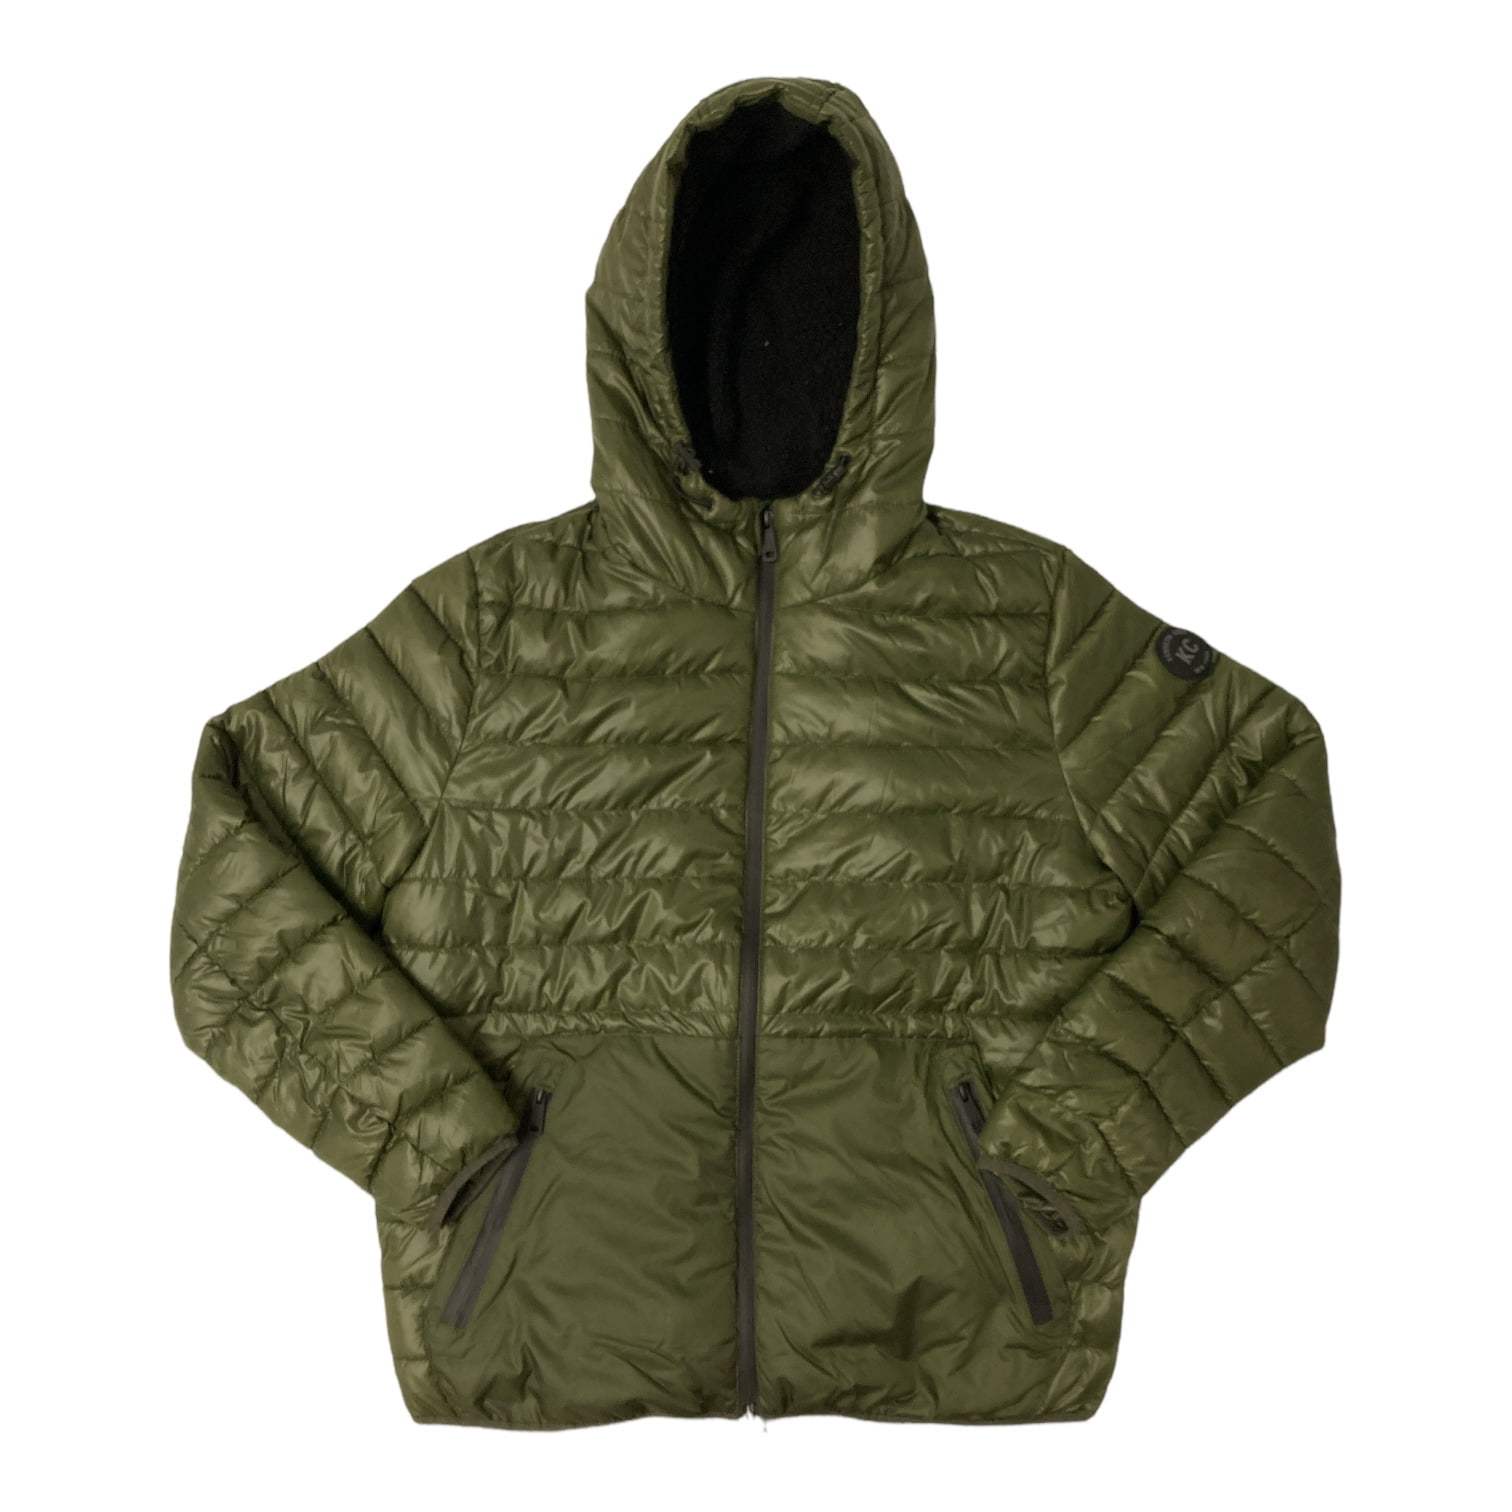 Kenneth Cole Men's Sherpa Lined Full Zip Puffer Jacket (Olive, M)